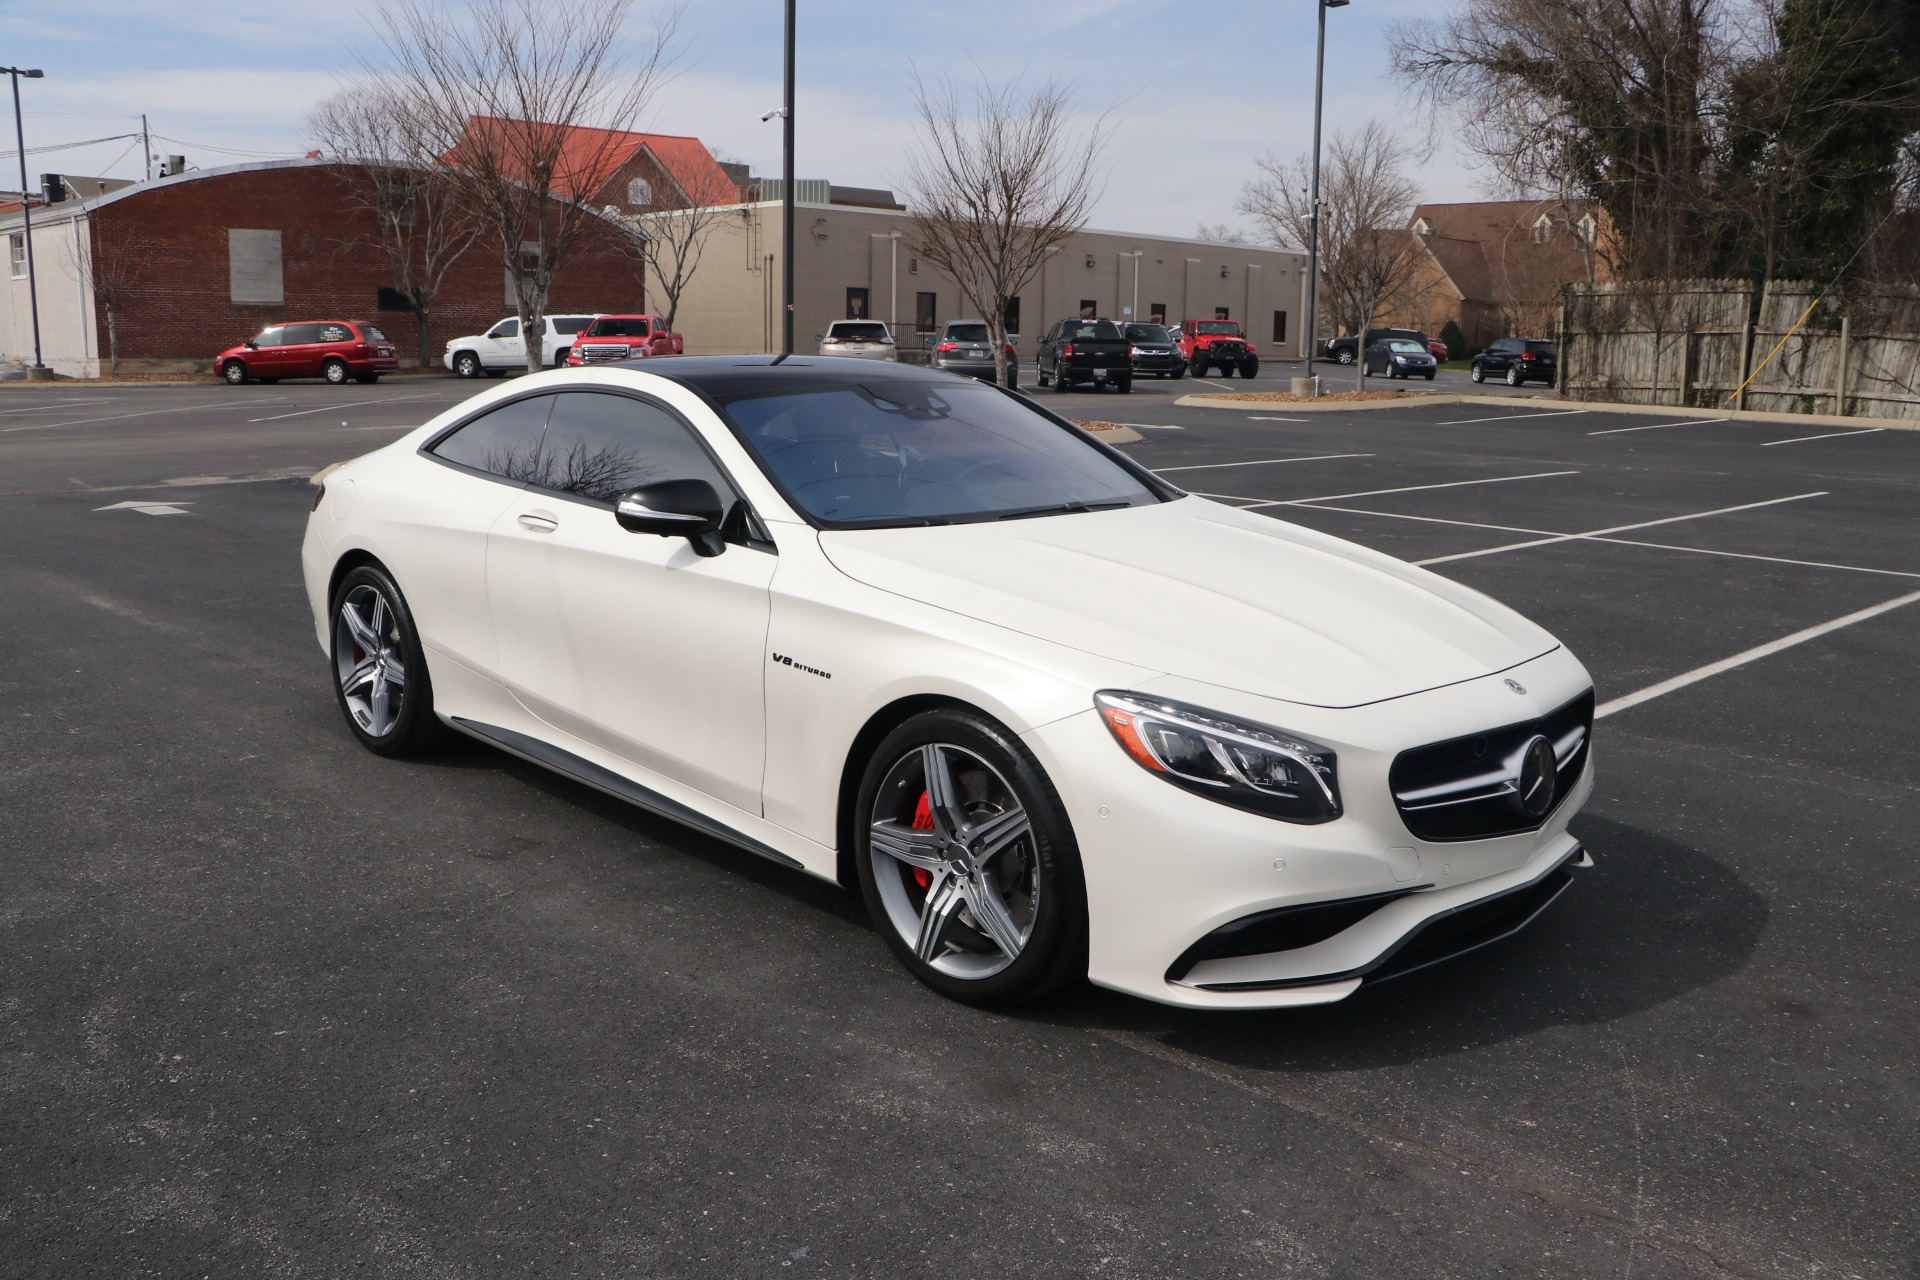 Used 2017 Mercedes Benz S63 Amg Coupe Awd Wnav For Sale 91950